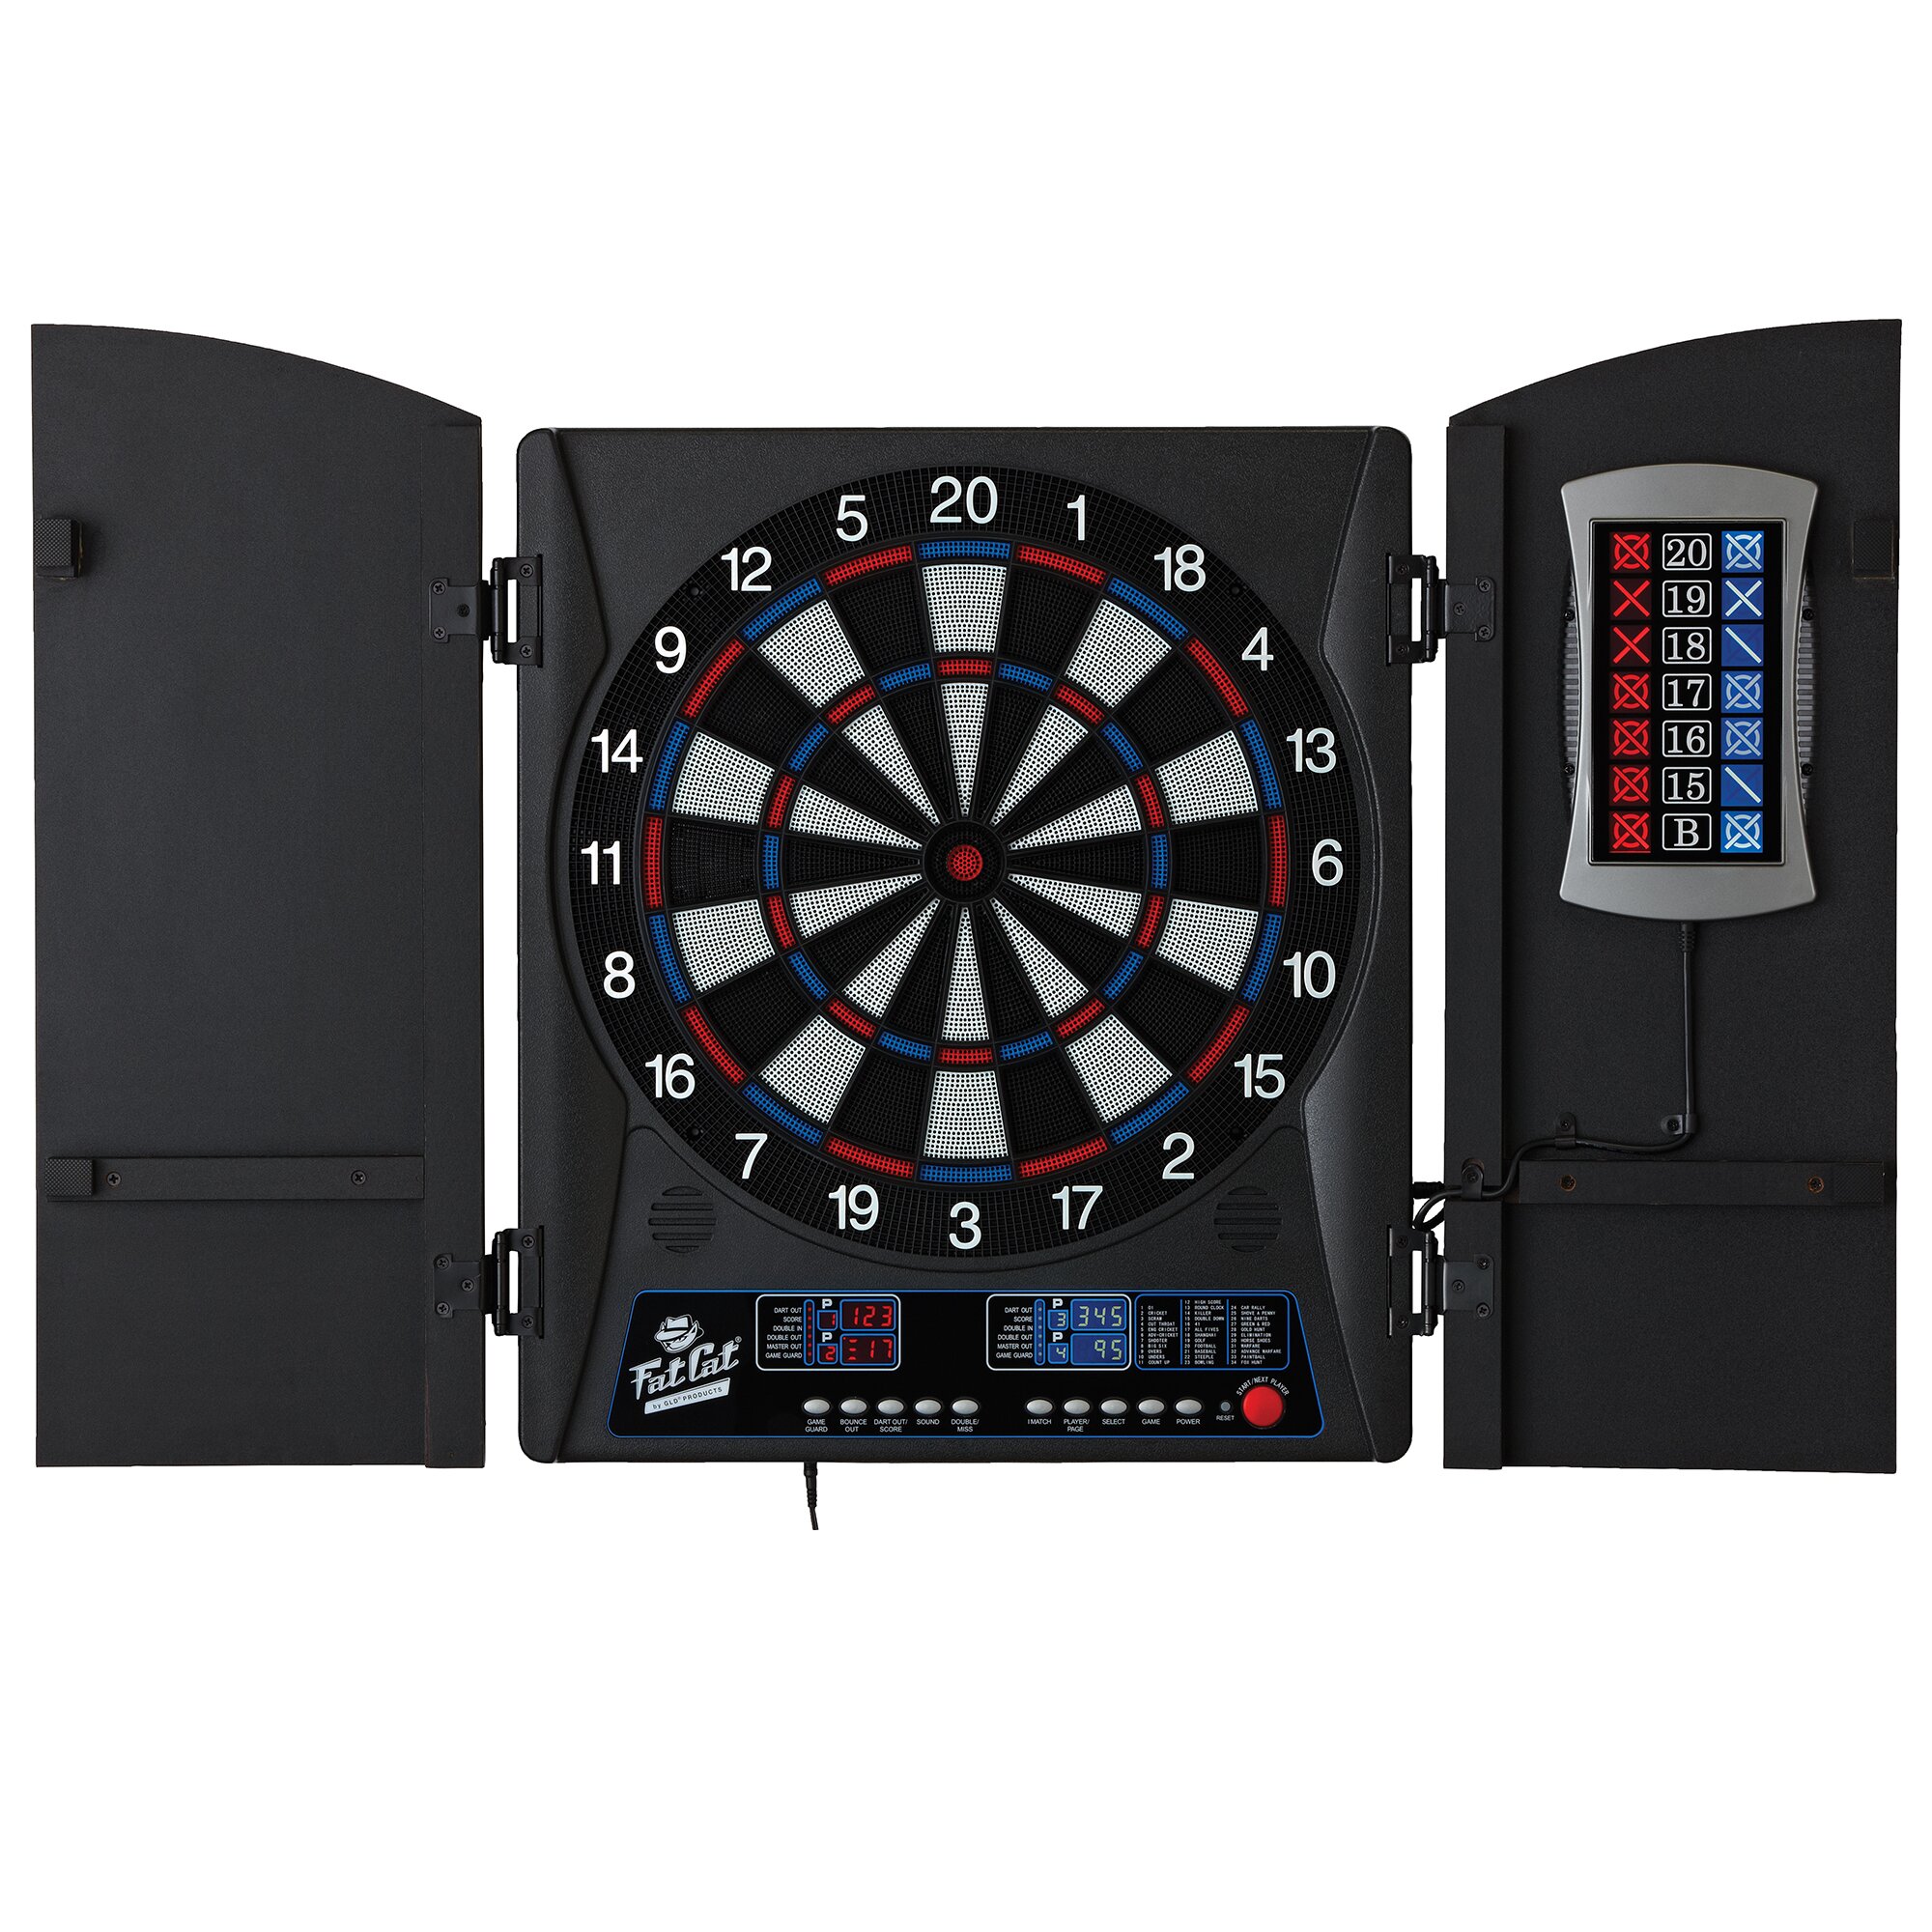 Dartboard- What Are The Vital Aspects To Look For While Buying The Dartboard?